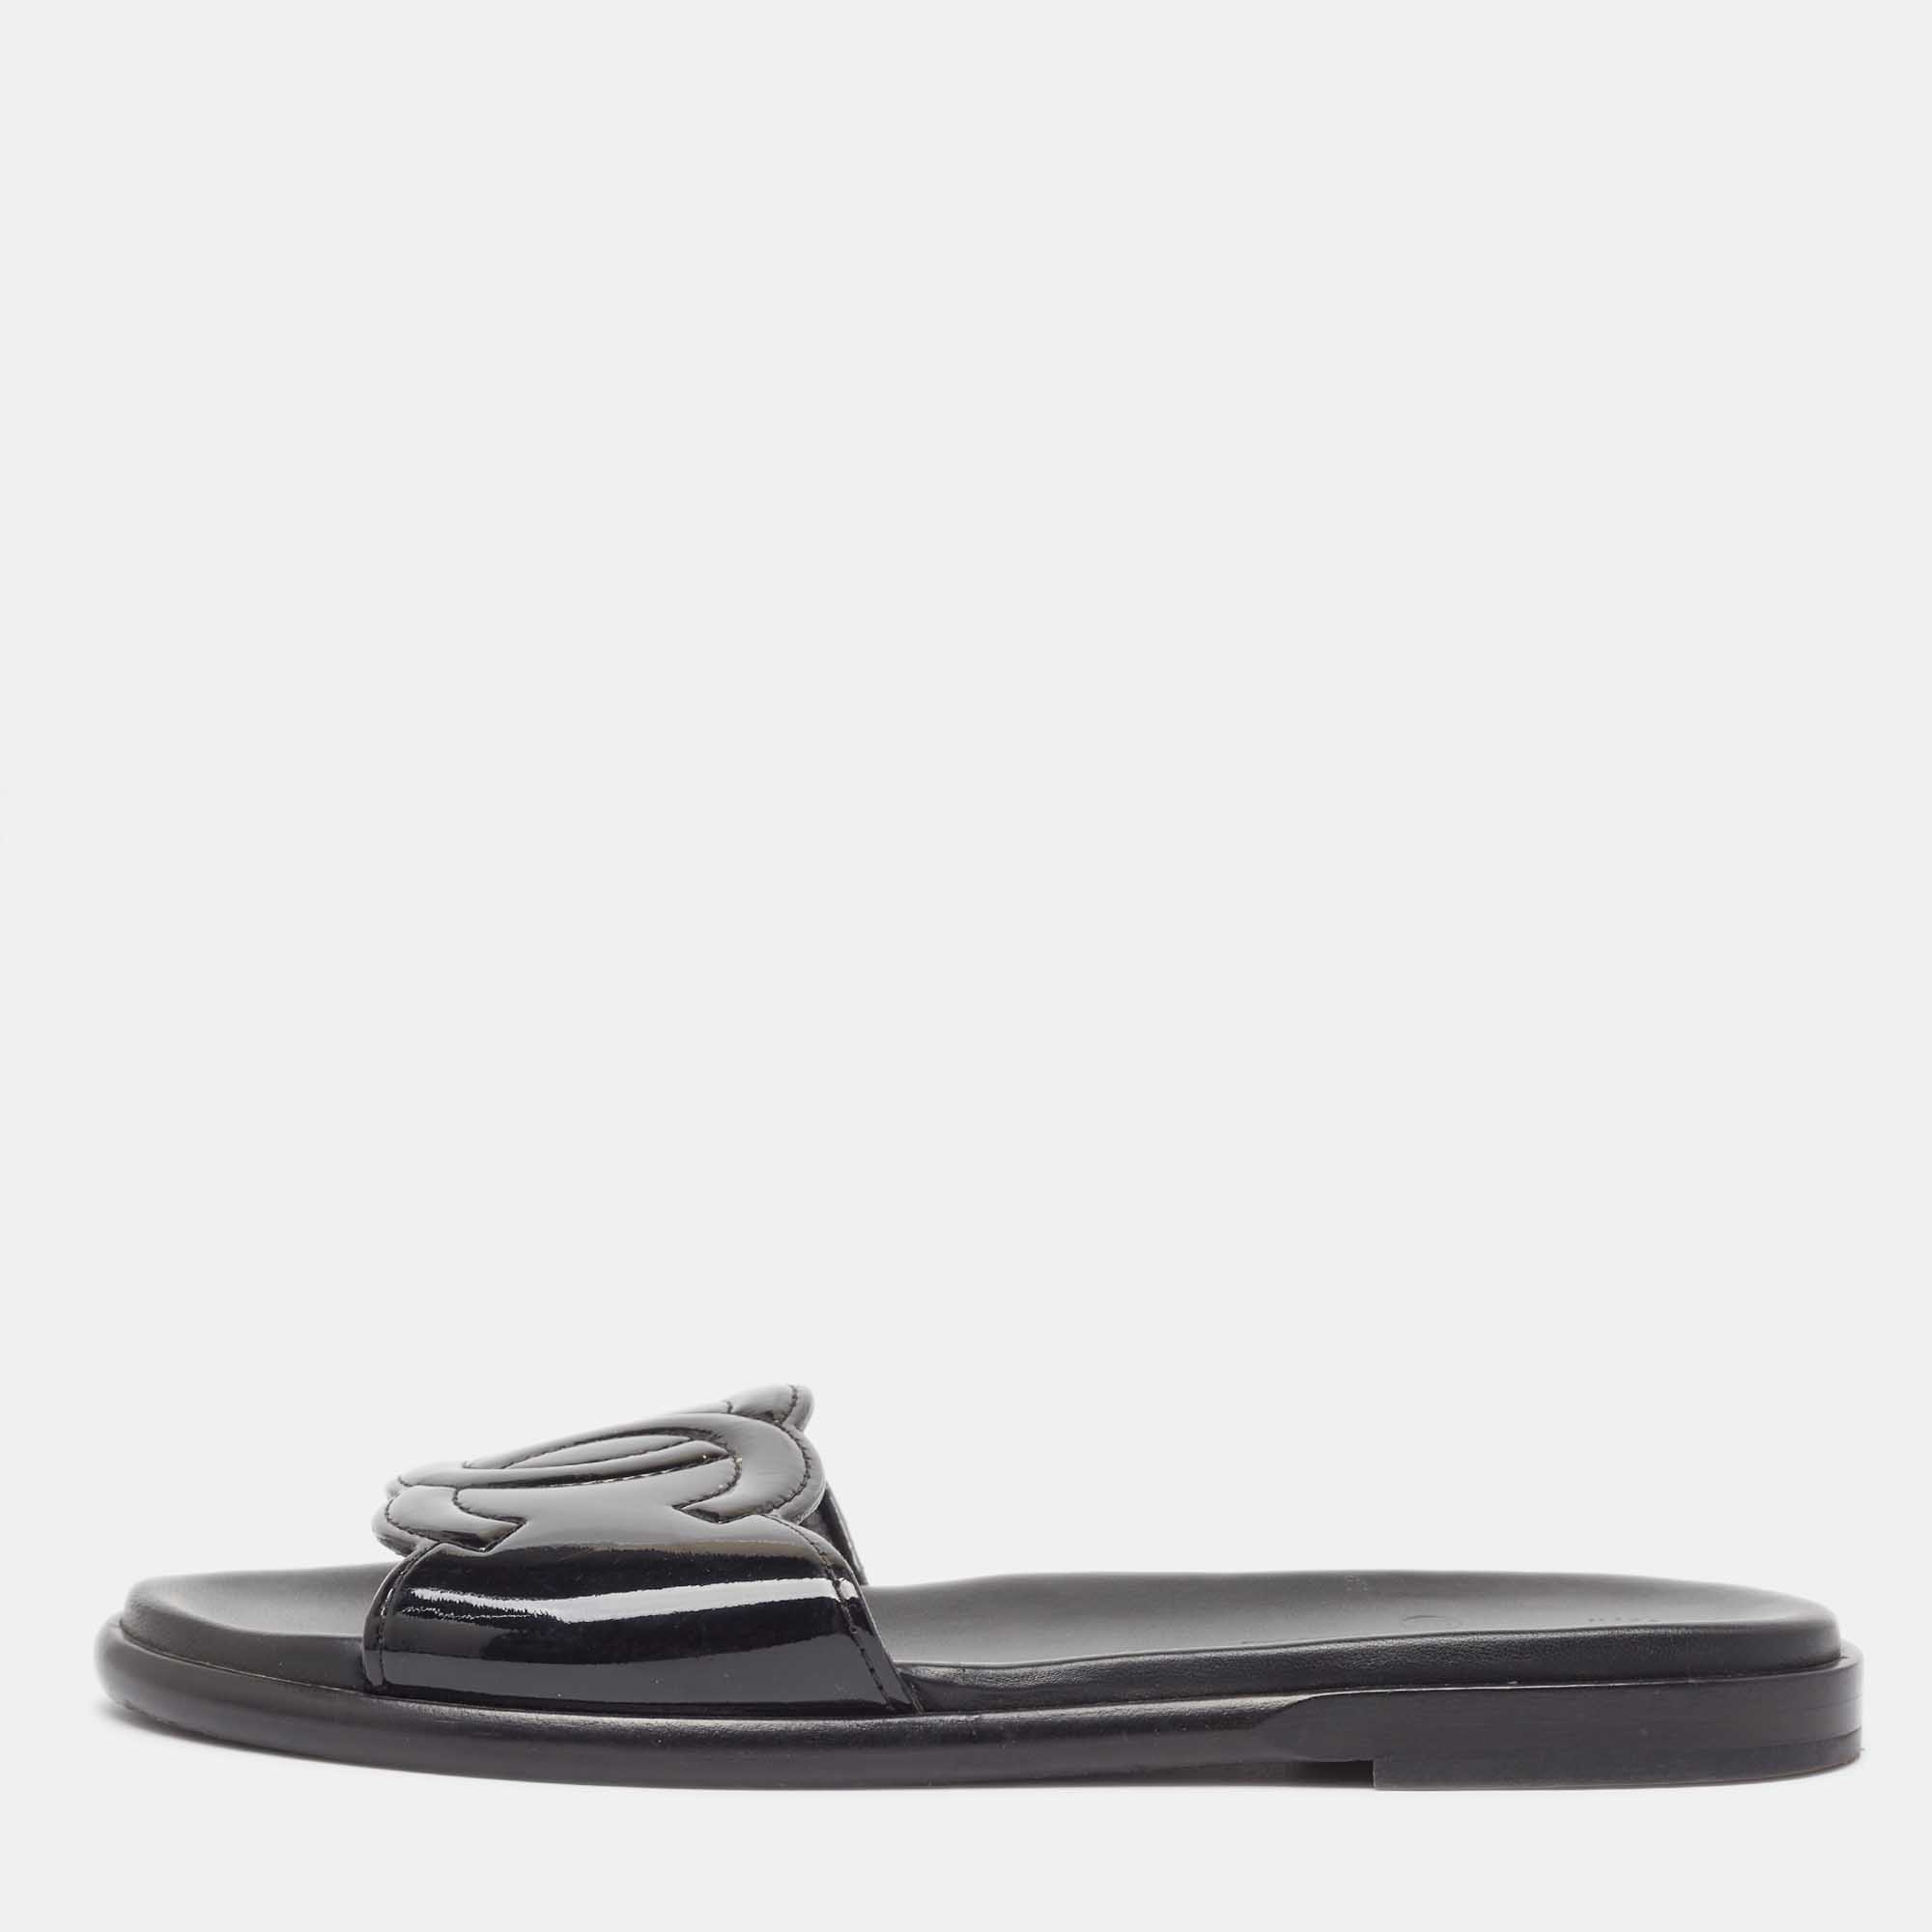 Pre-owned Chanel Black Patent Leather Cc Flat Slides Size 39.5